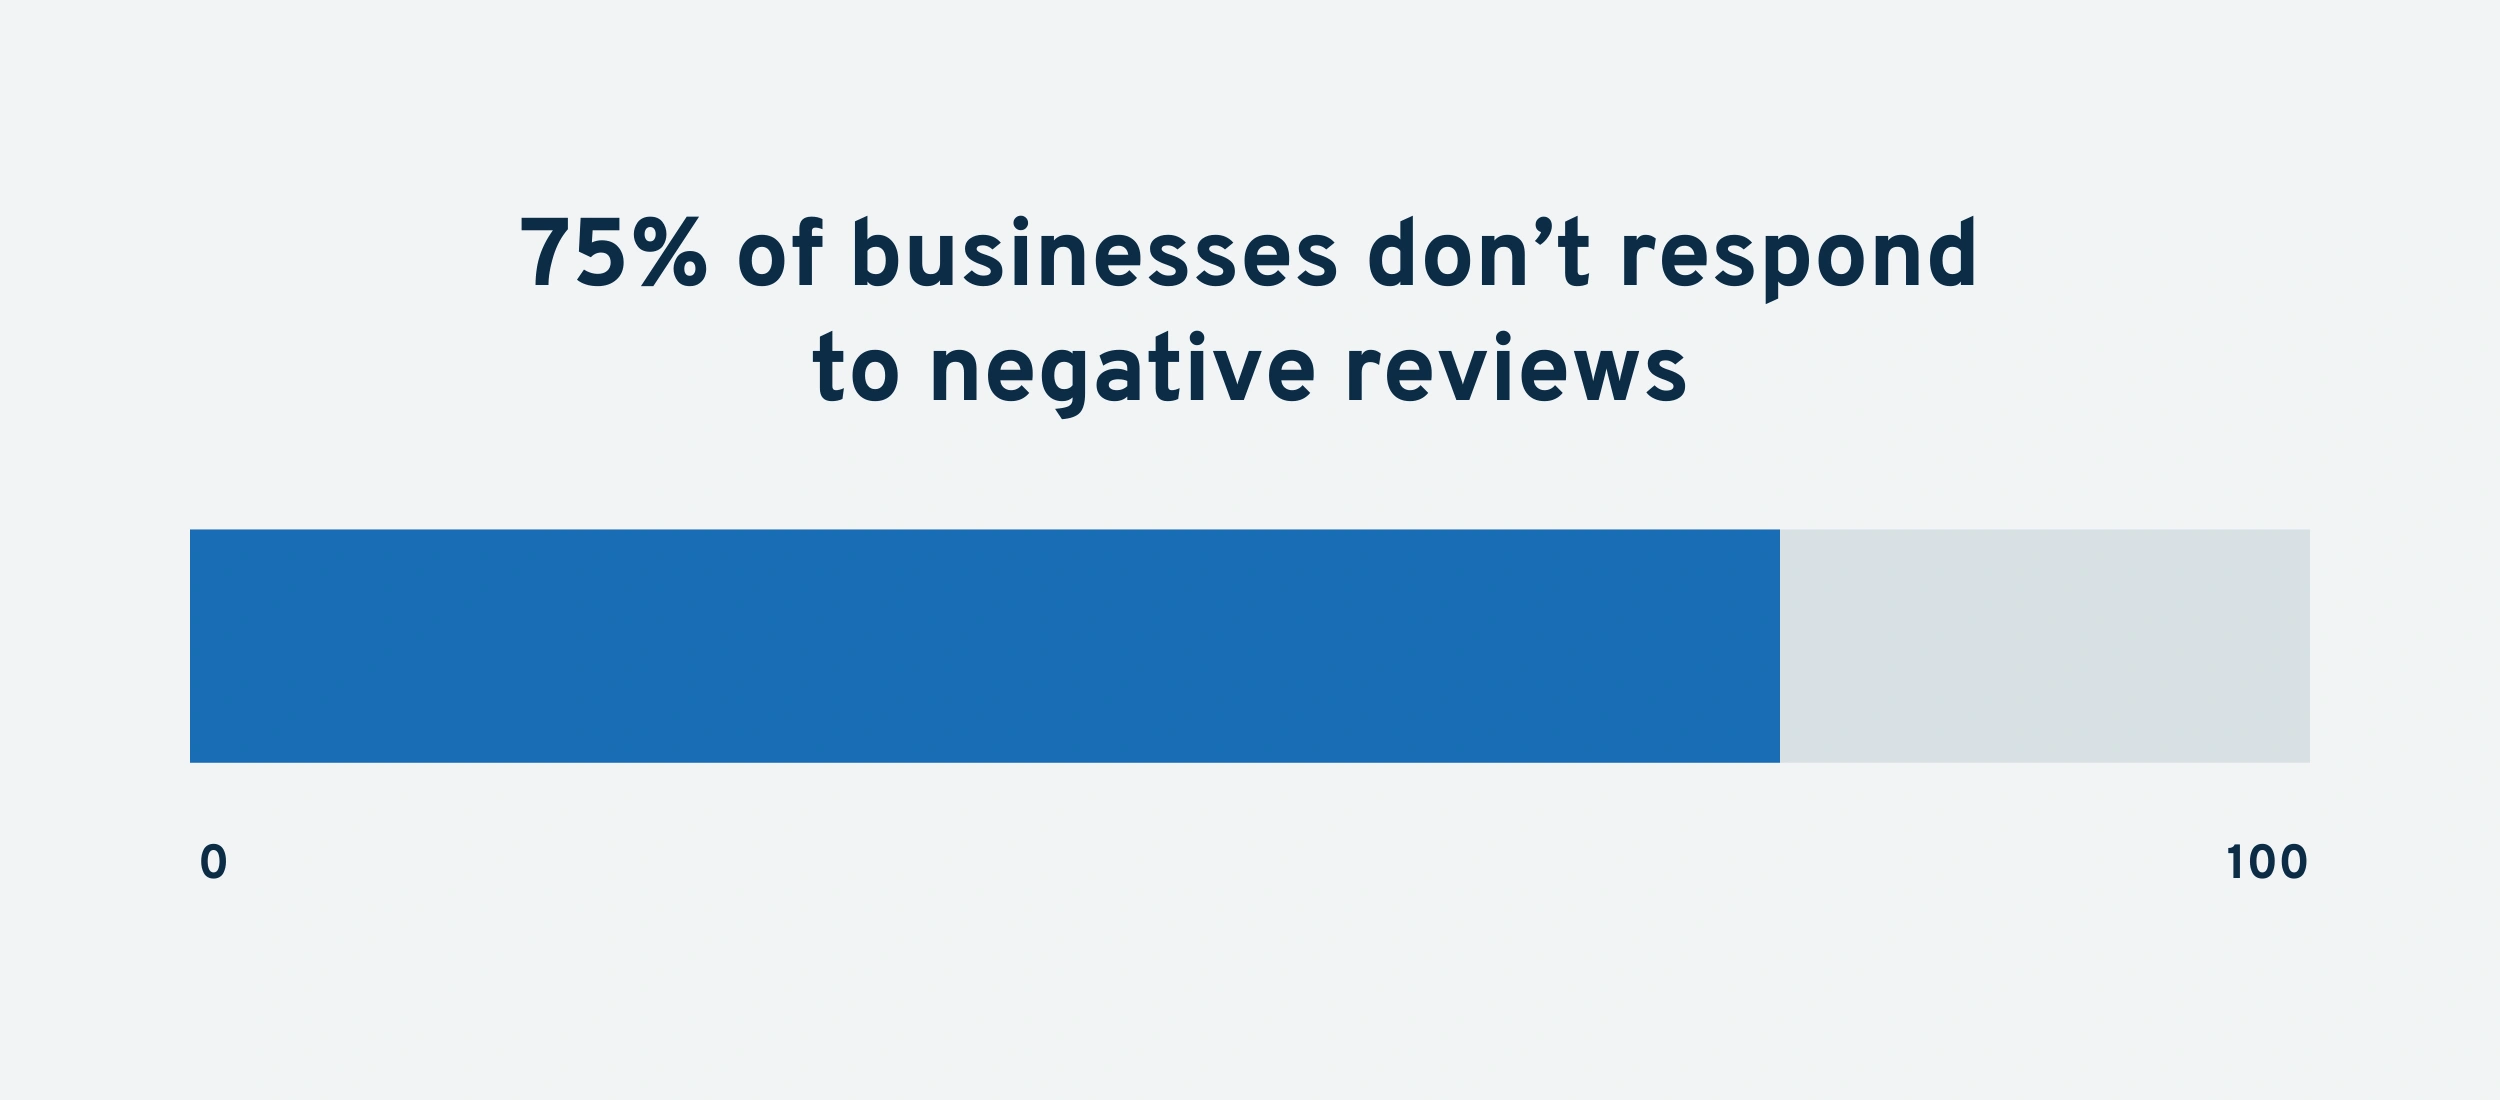 responding-to-negative-reviews-min.png